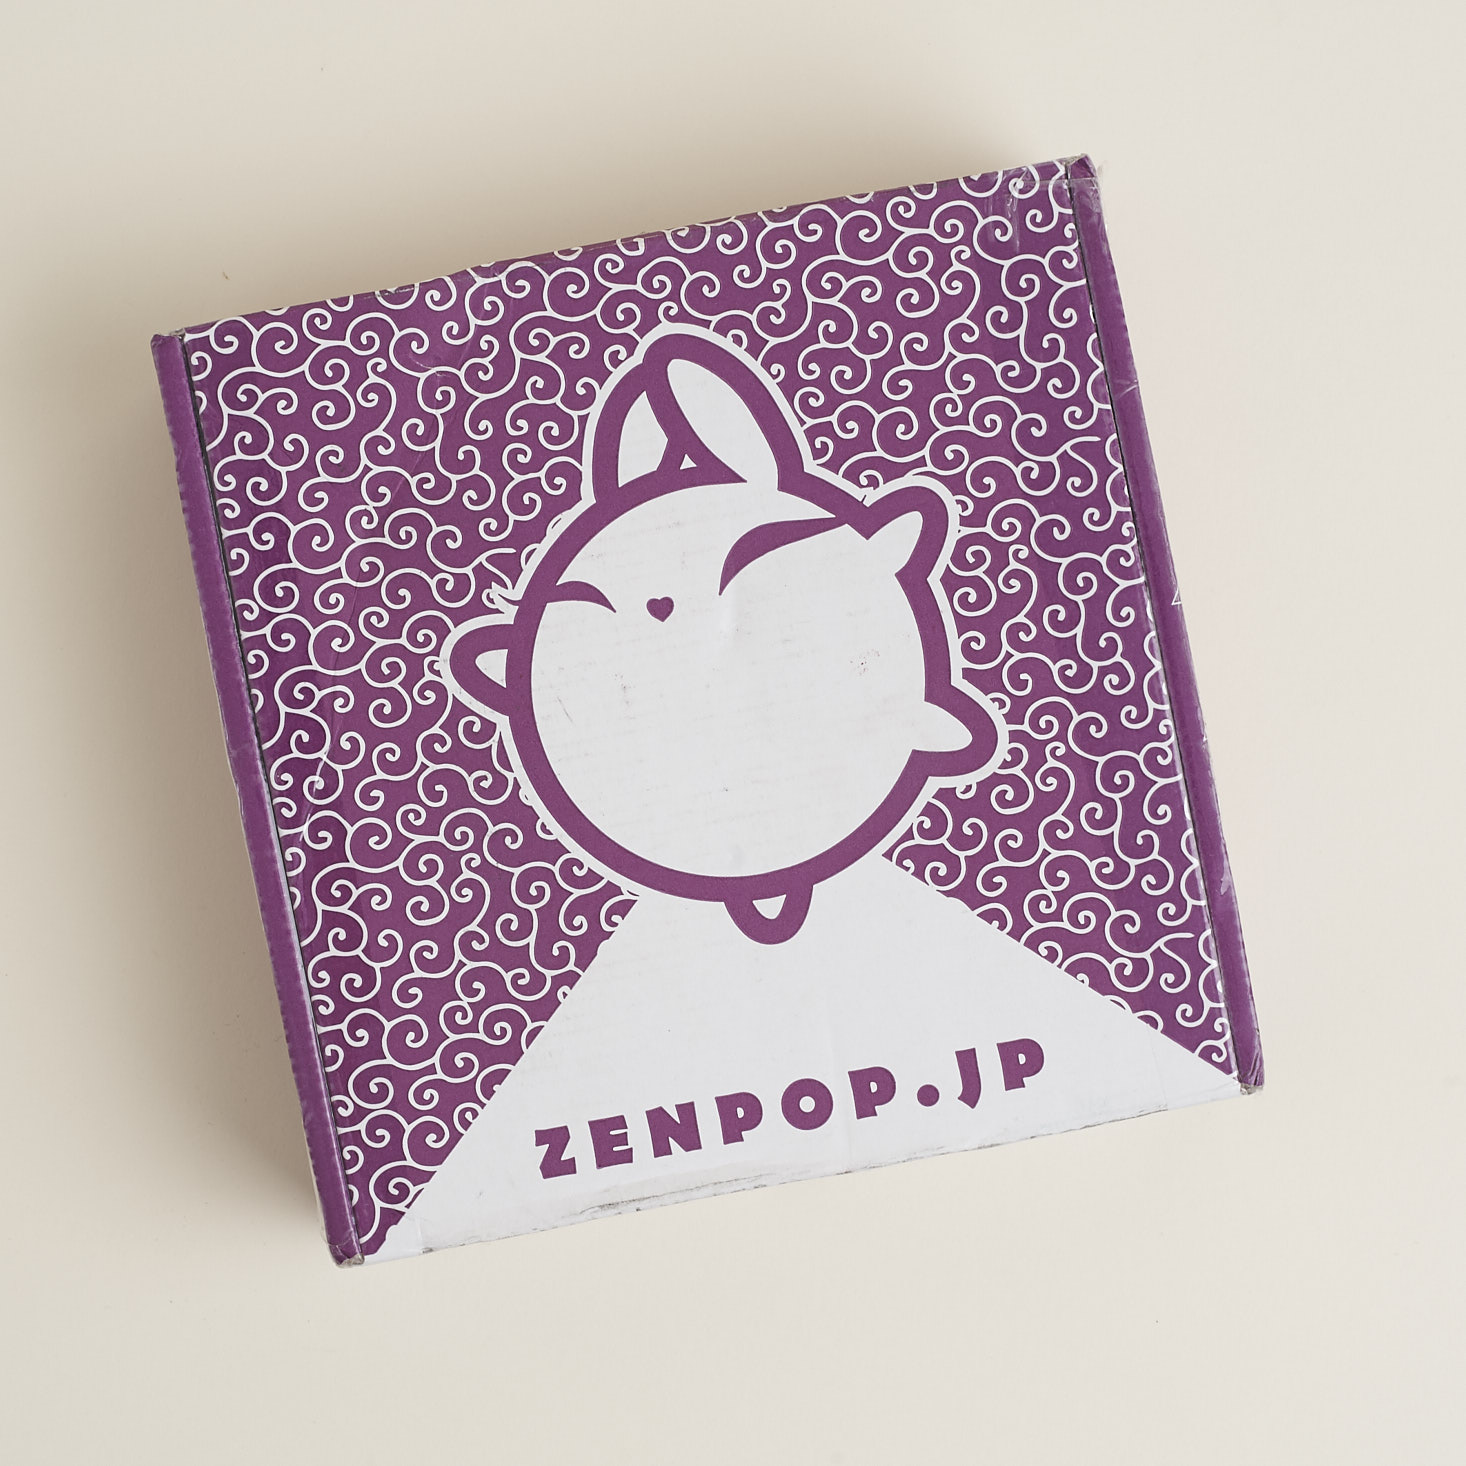 ZenPop Japanese Stationery Pack Review – February 2018